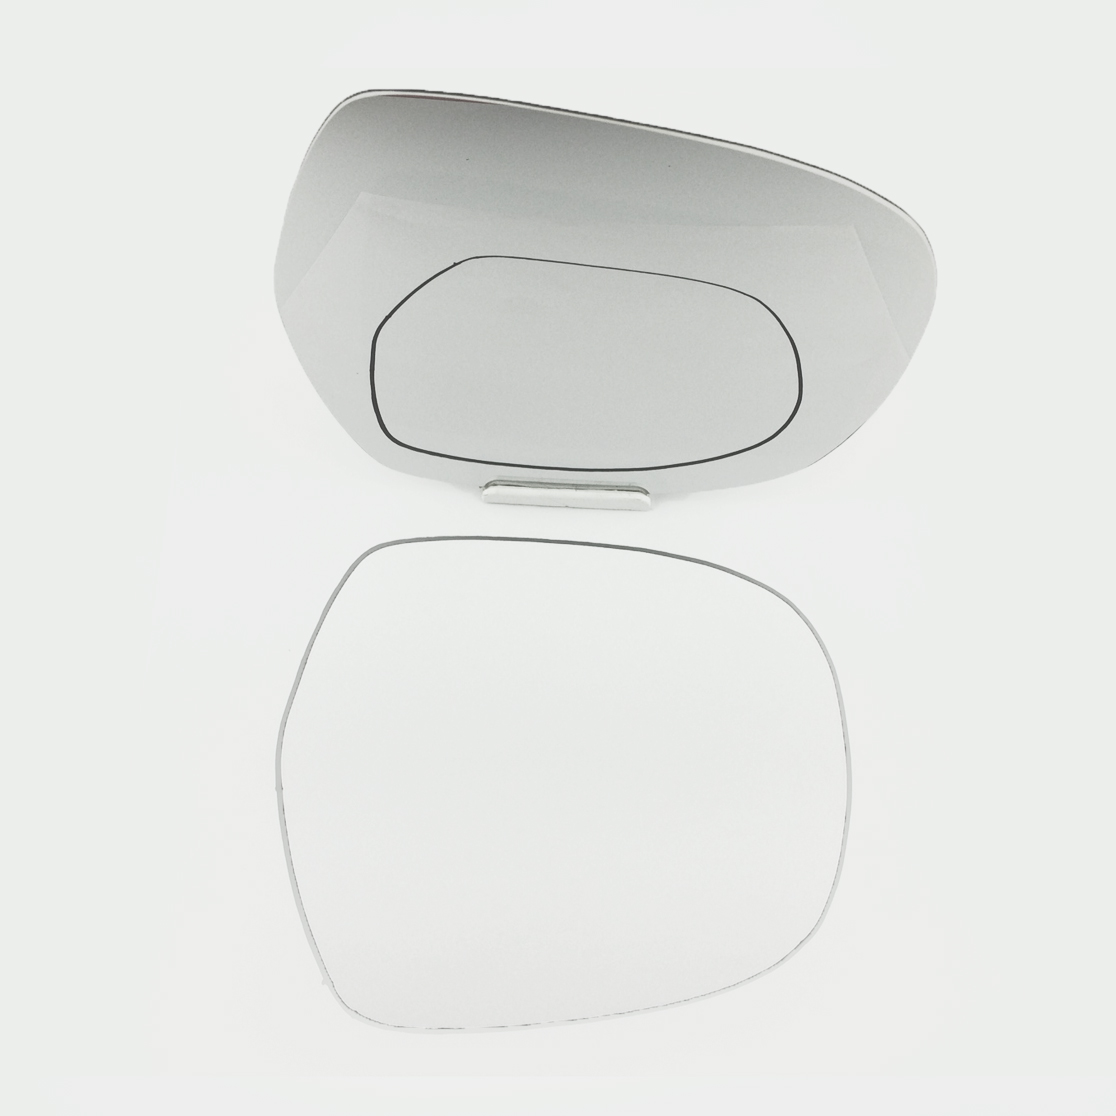 Toyota Landcruiser Prado Wing Mirror Glass RIGHT HAND ( UK Driver Side ) 2009 to 2016 – Convex Wing Mirror